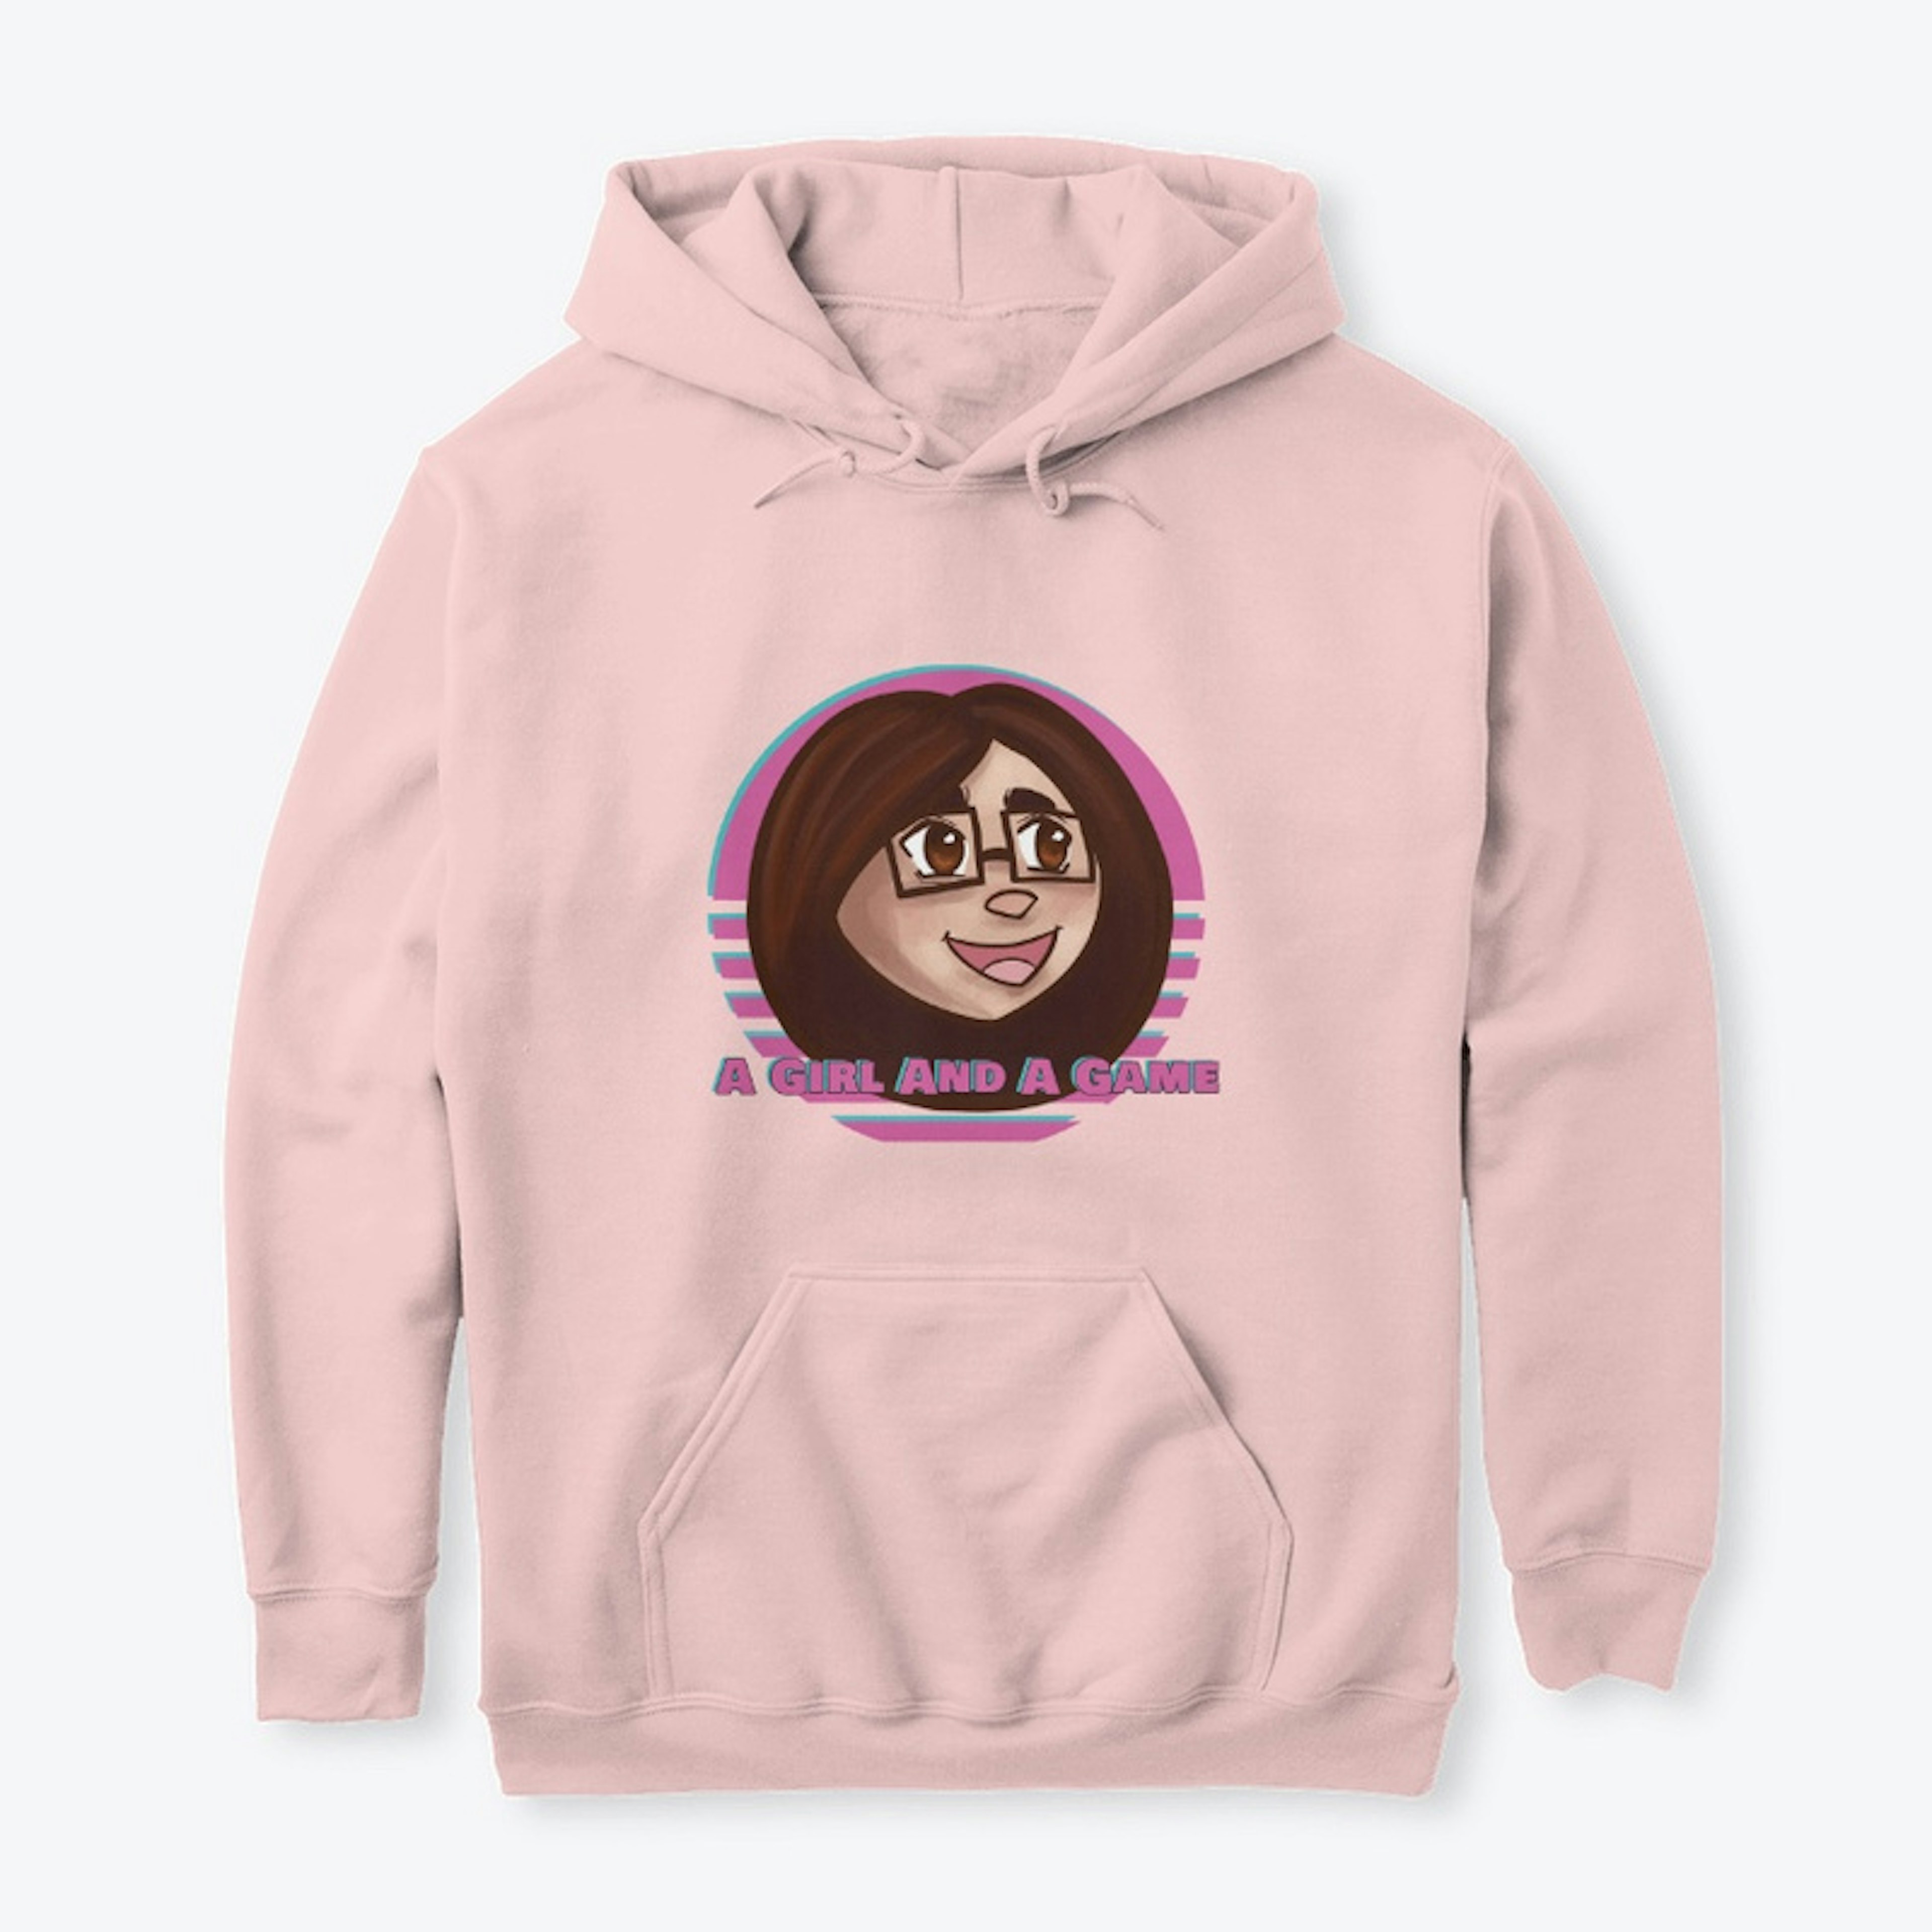 A Girl And A Game Logo Hoodie